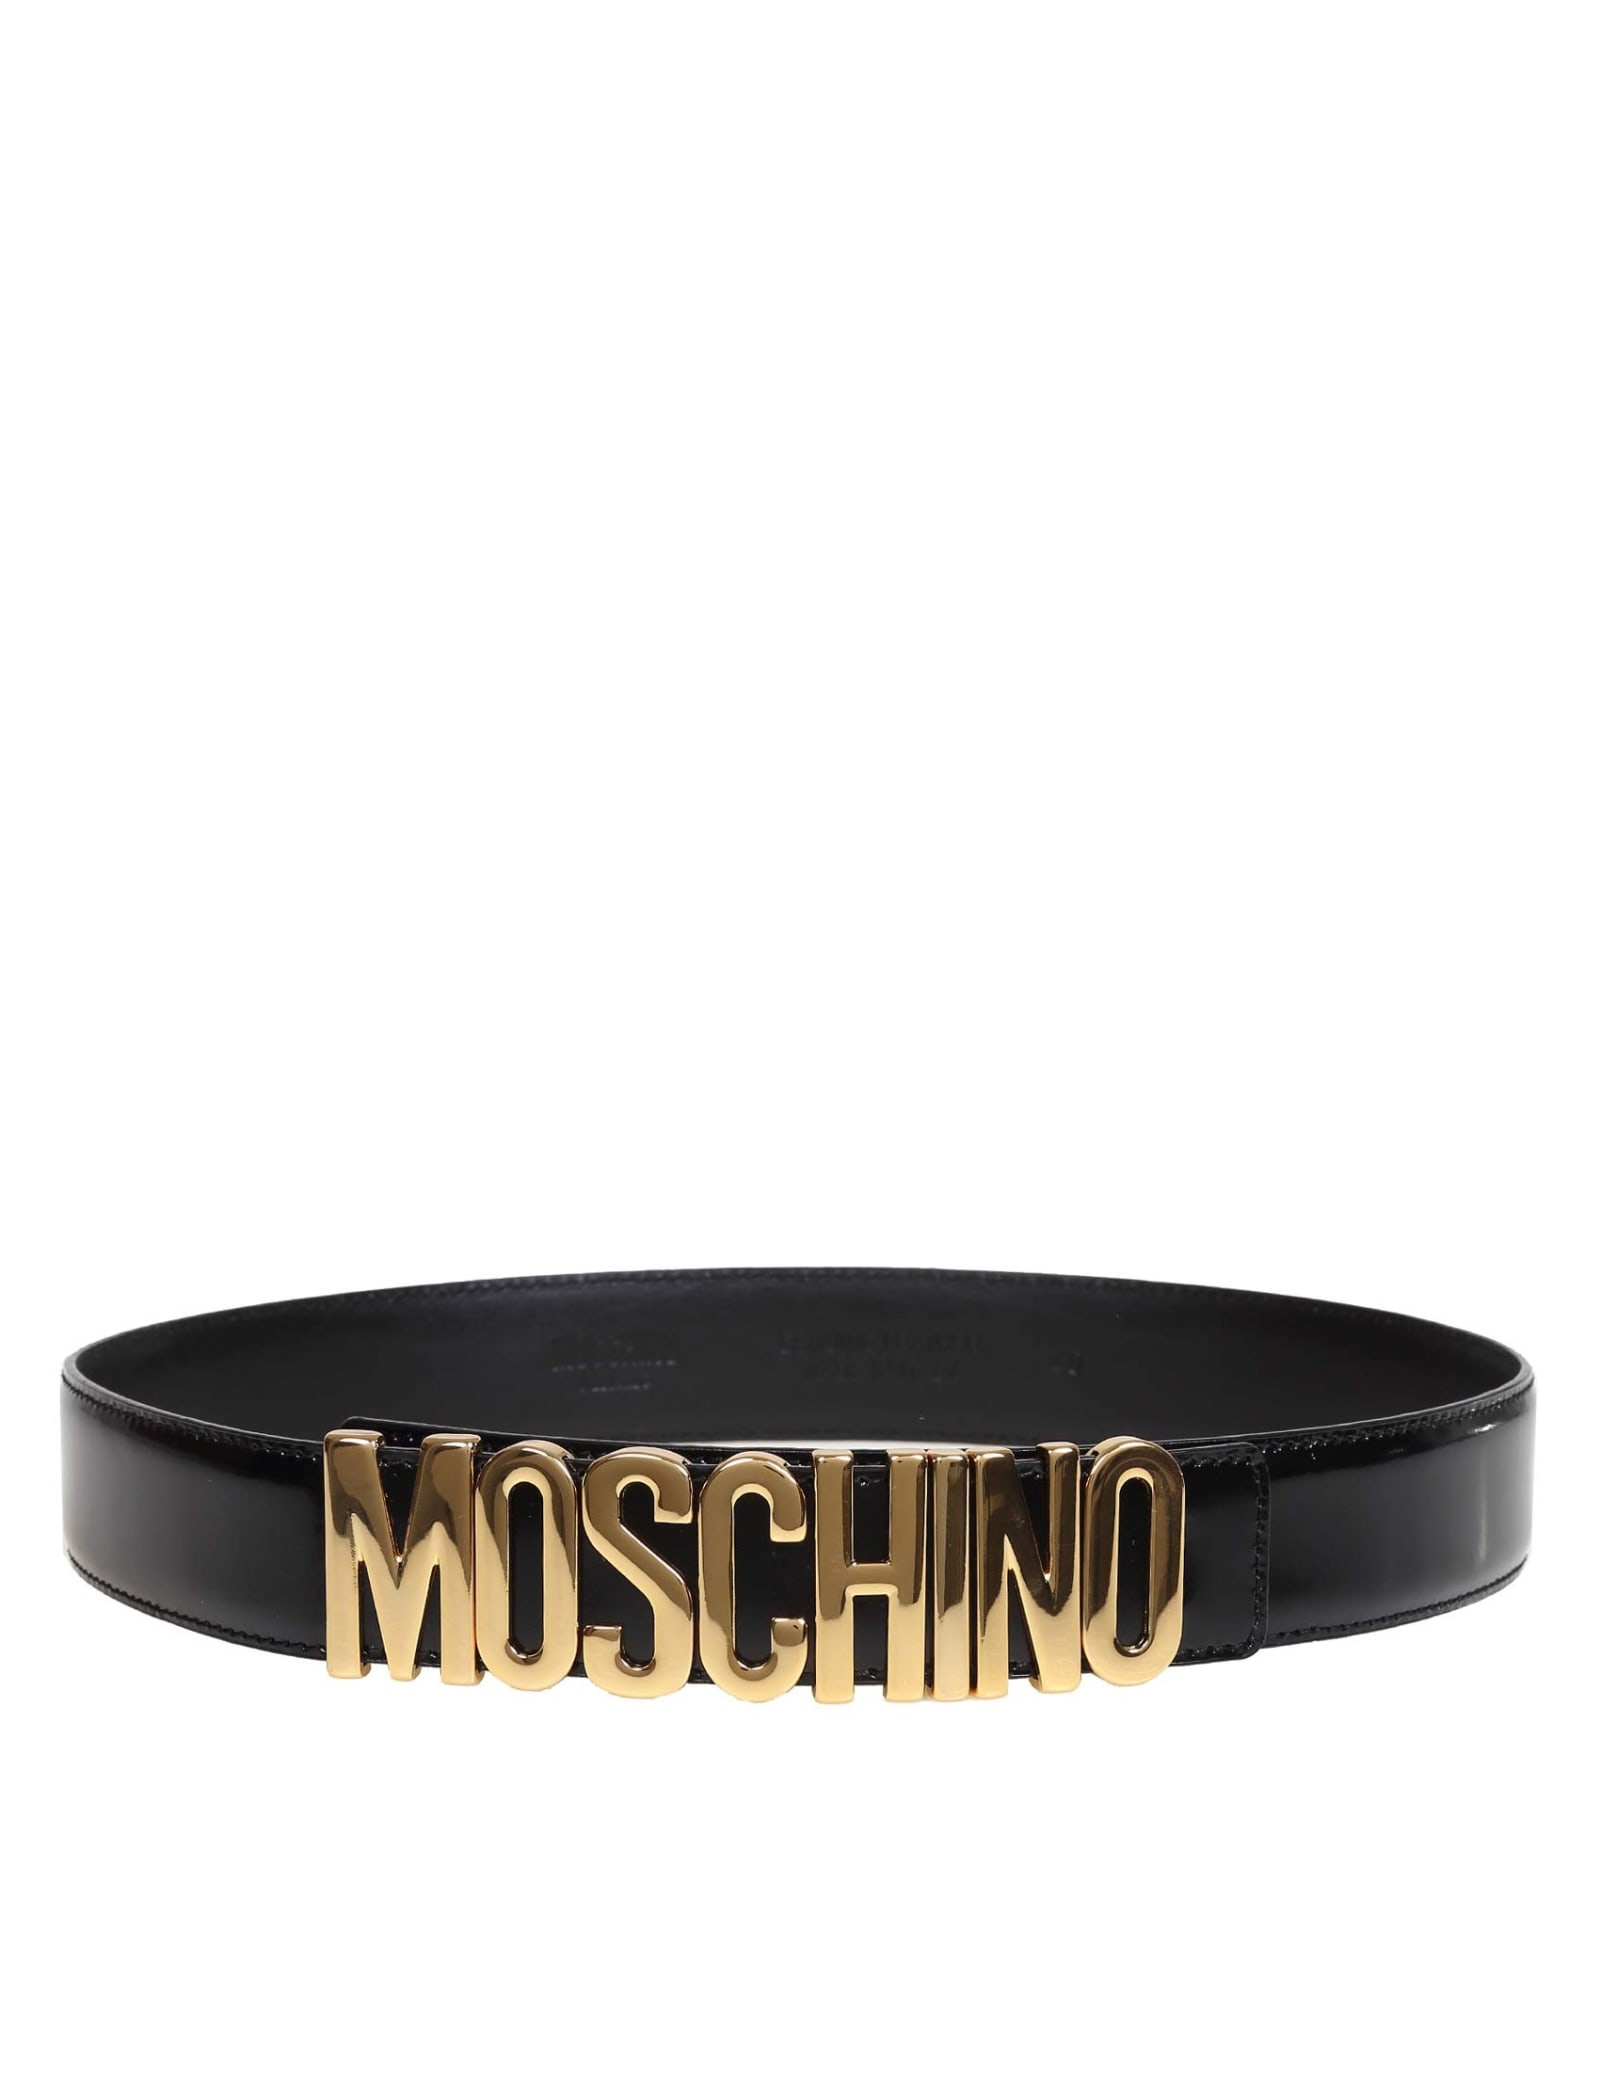 Moschino Black Leather Belt With Lettering Logo